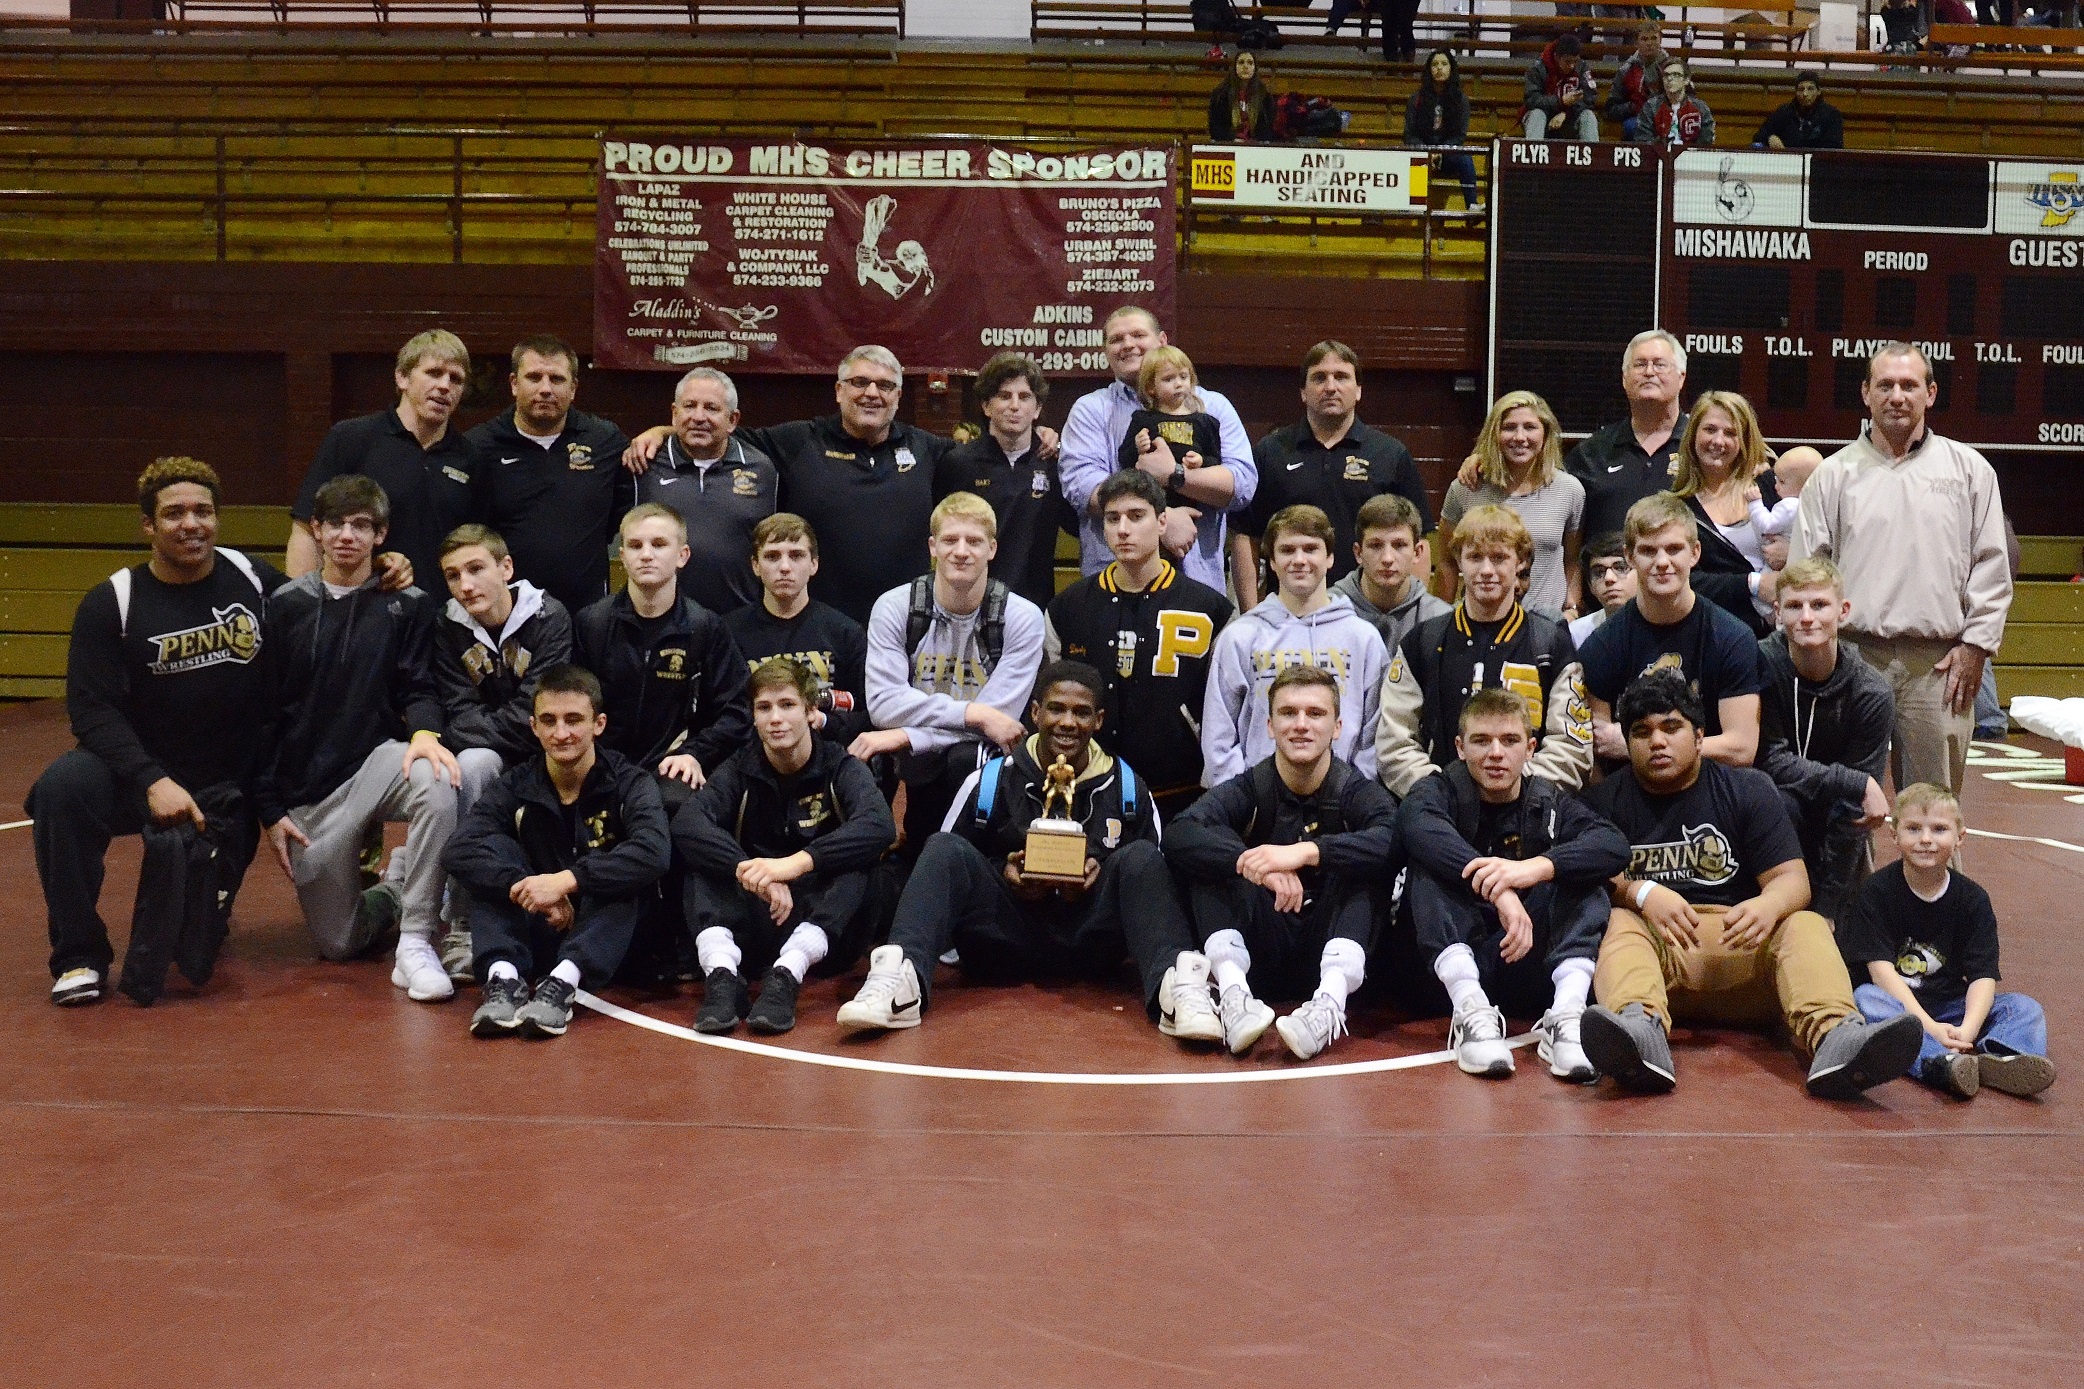 More information about "Penn's team, Lowell's Drew Hughes win fourth straight Al Smith Classic"